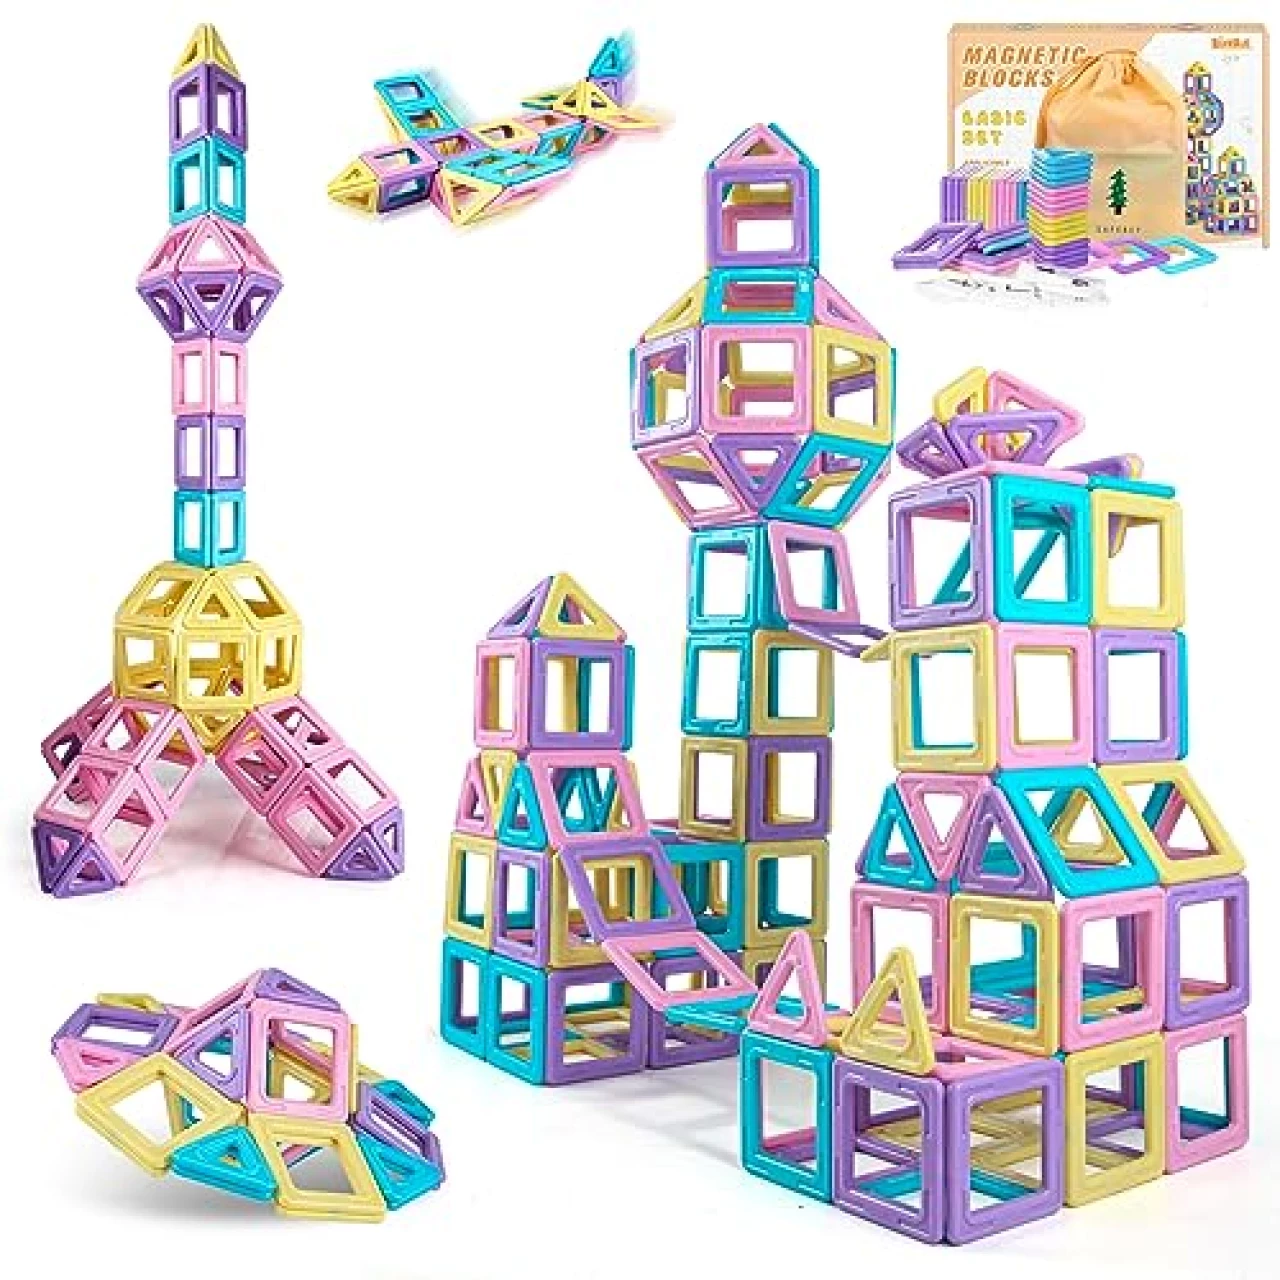 Rurvale Magnetic Blocks Basic Set (28 Pieces+Number Kits), STEM Toys for 3 4 5 6 7 Year Old Girls Boys, Magnetic Tiles, Educational Magnet Toys for Toddlers 3-5, 4-8 Gift